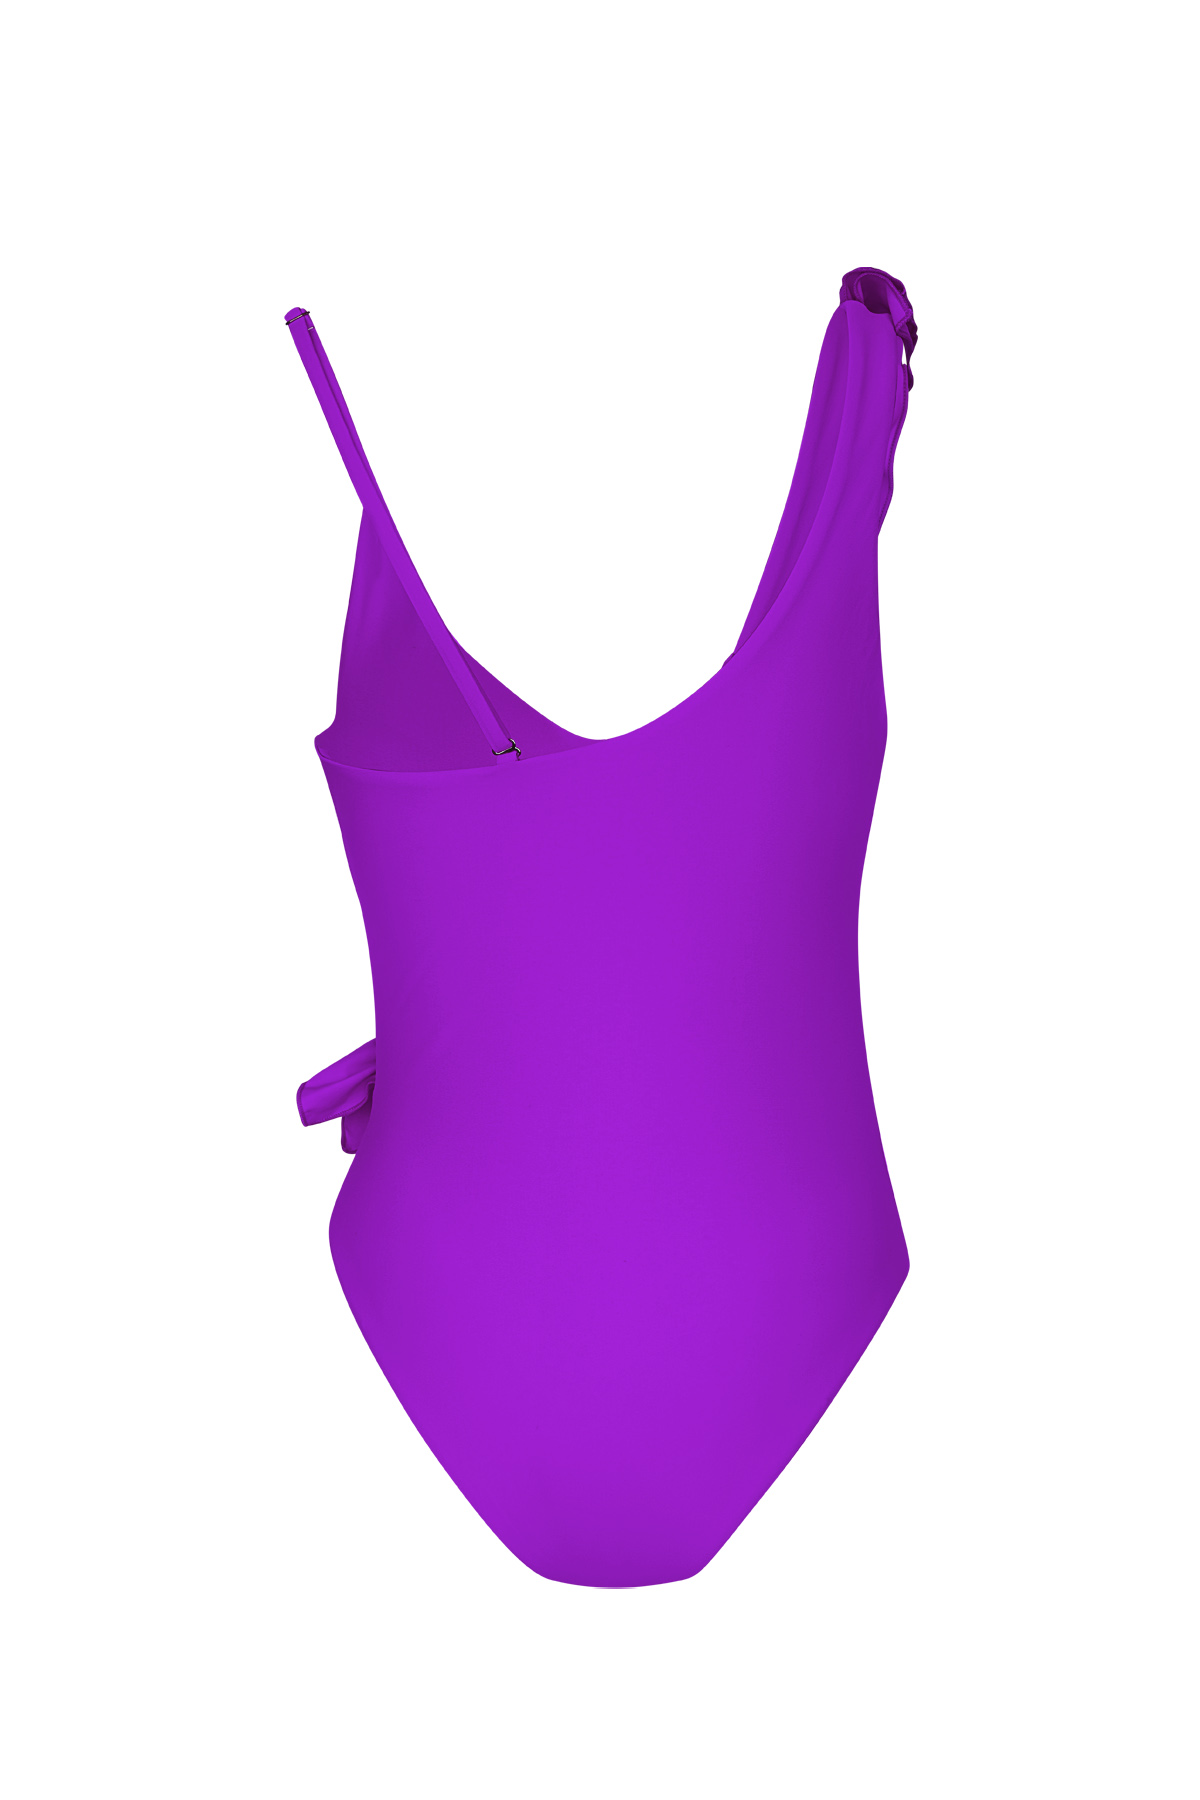 Swimsuit ruffle - purple S h5 Picture6